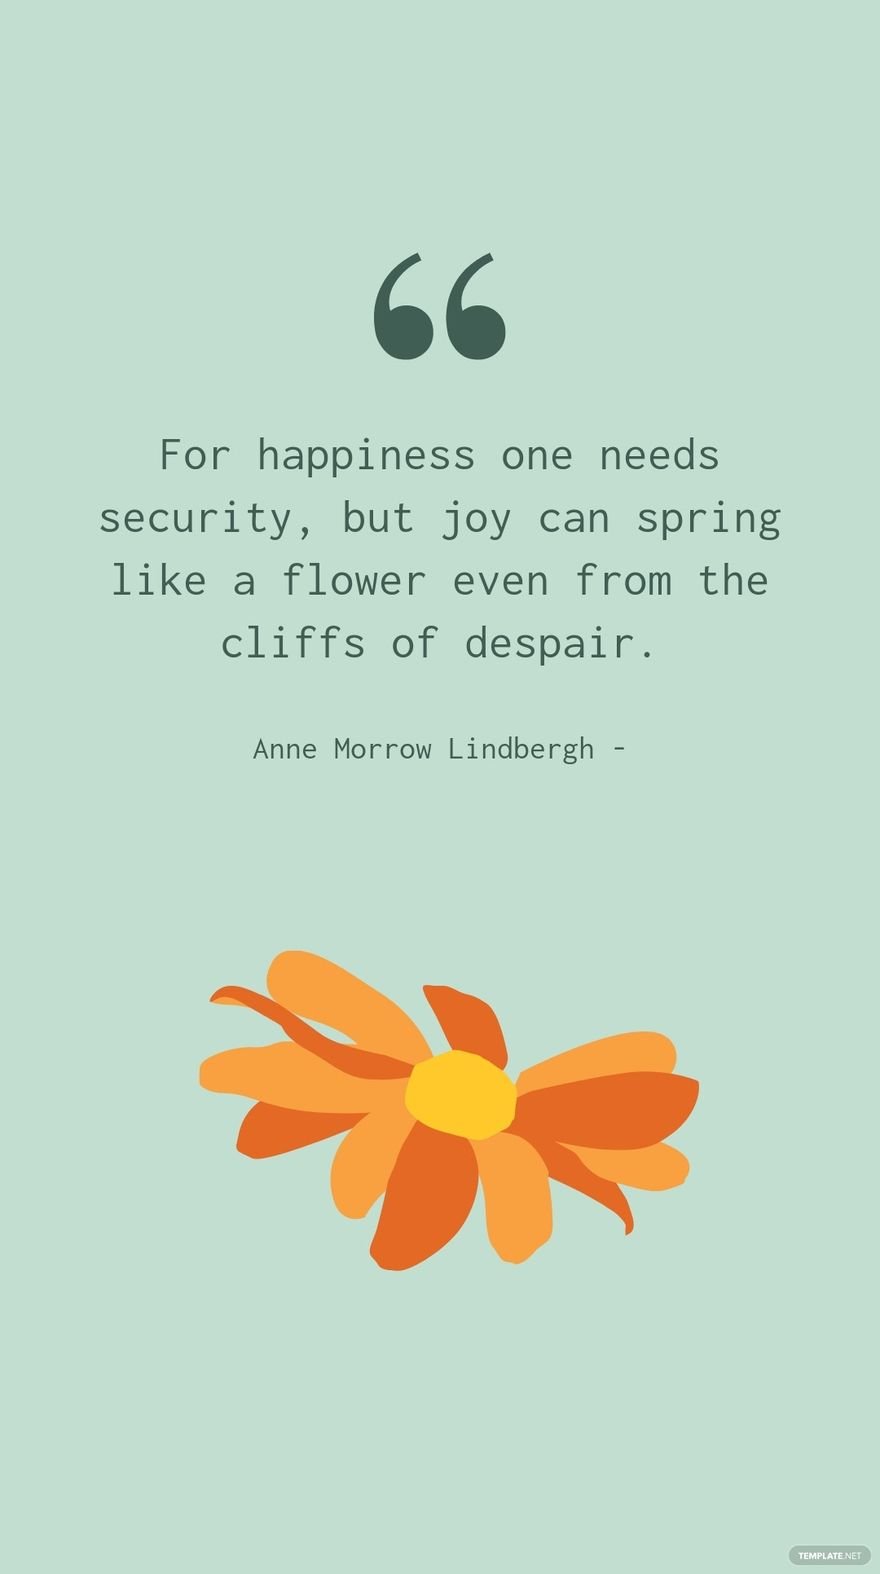 Anne Morrow Lindbergh - For happiness one needs security, but joy can spring like a flower even from the cliffs of despair.